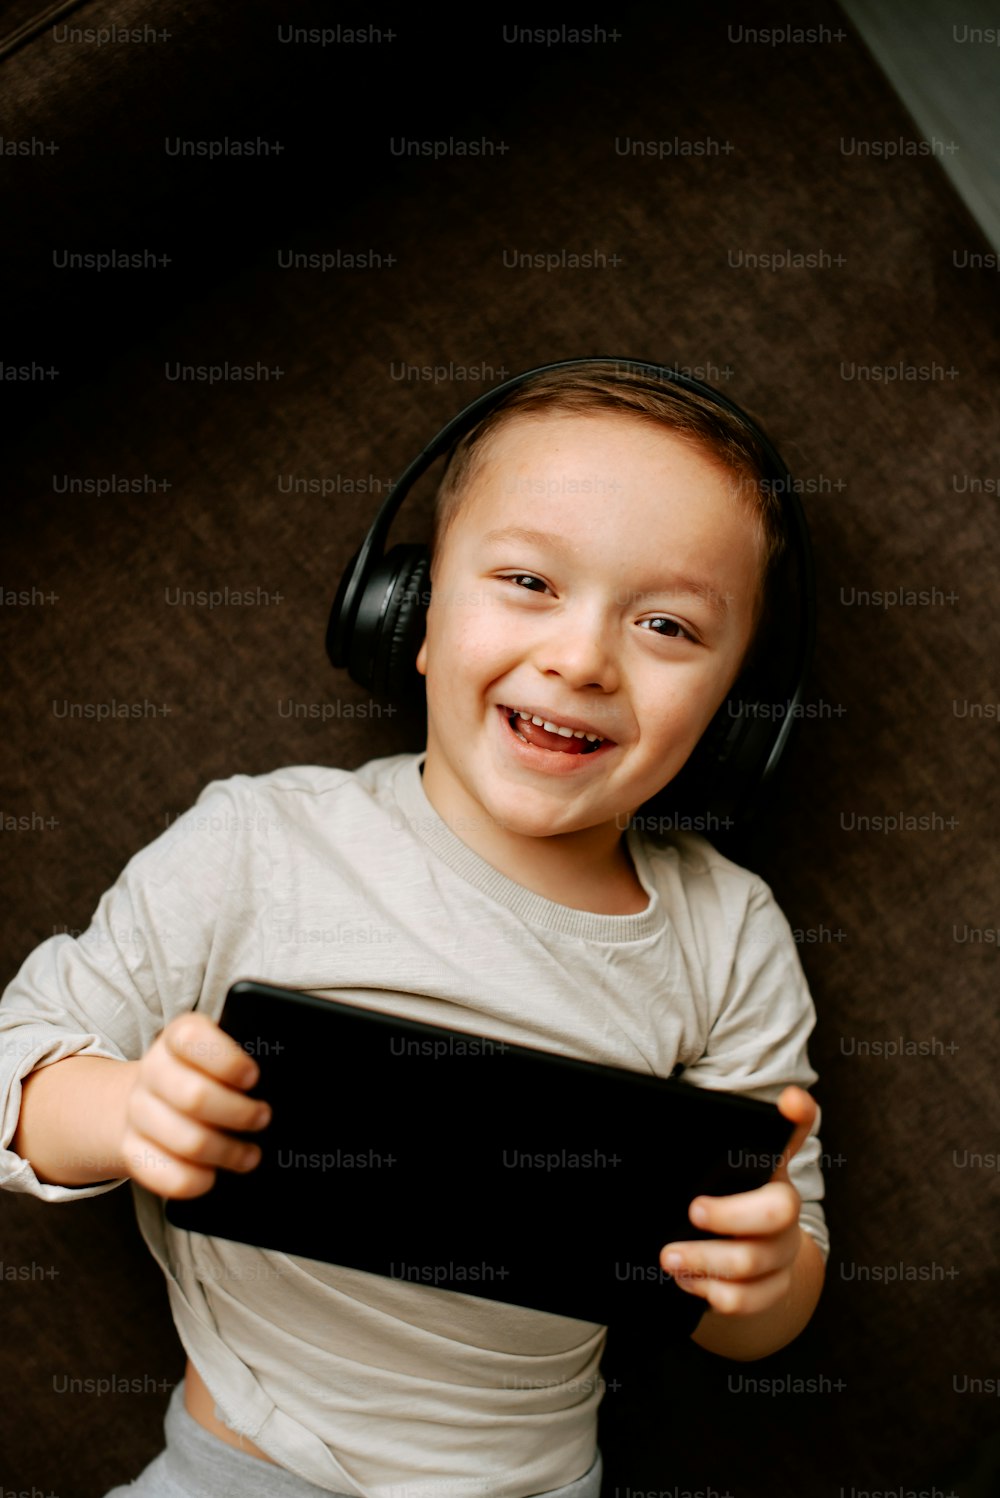 a young boy wearing headphones and holding a tablet